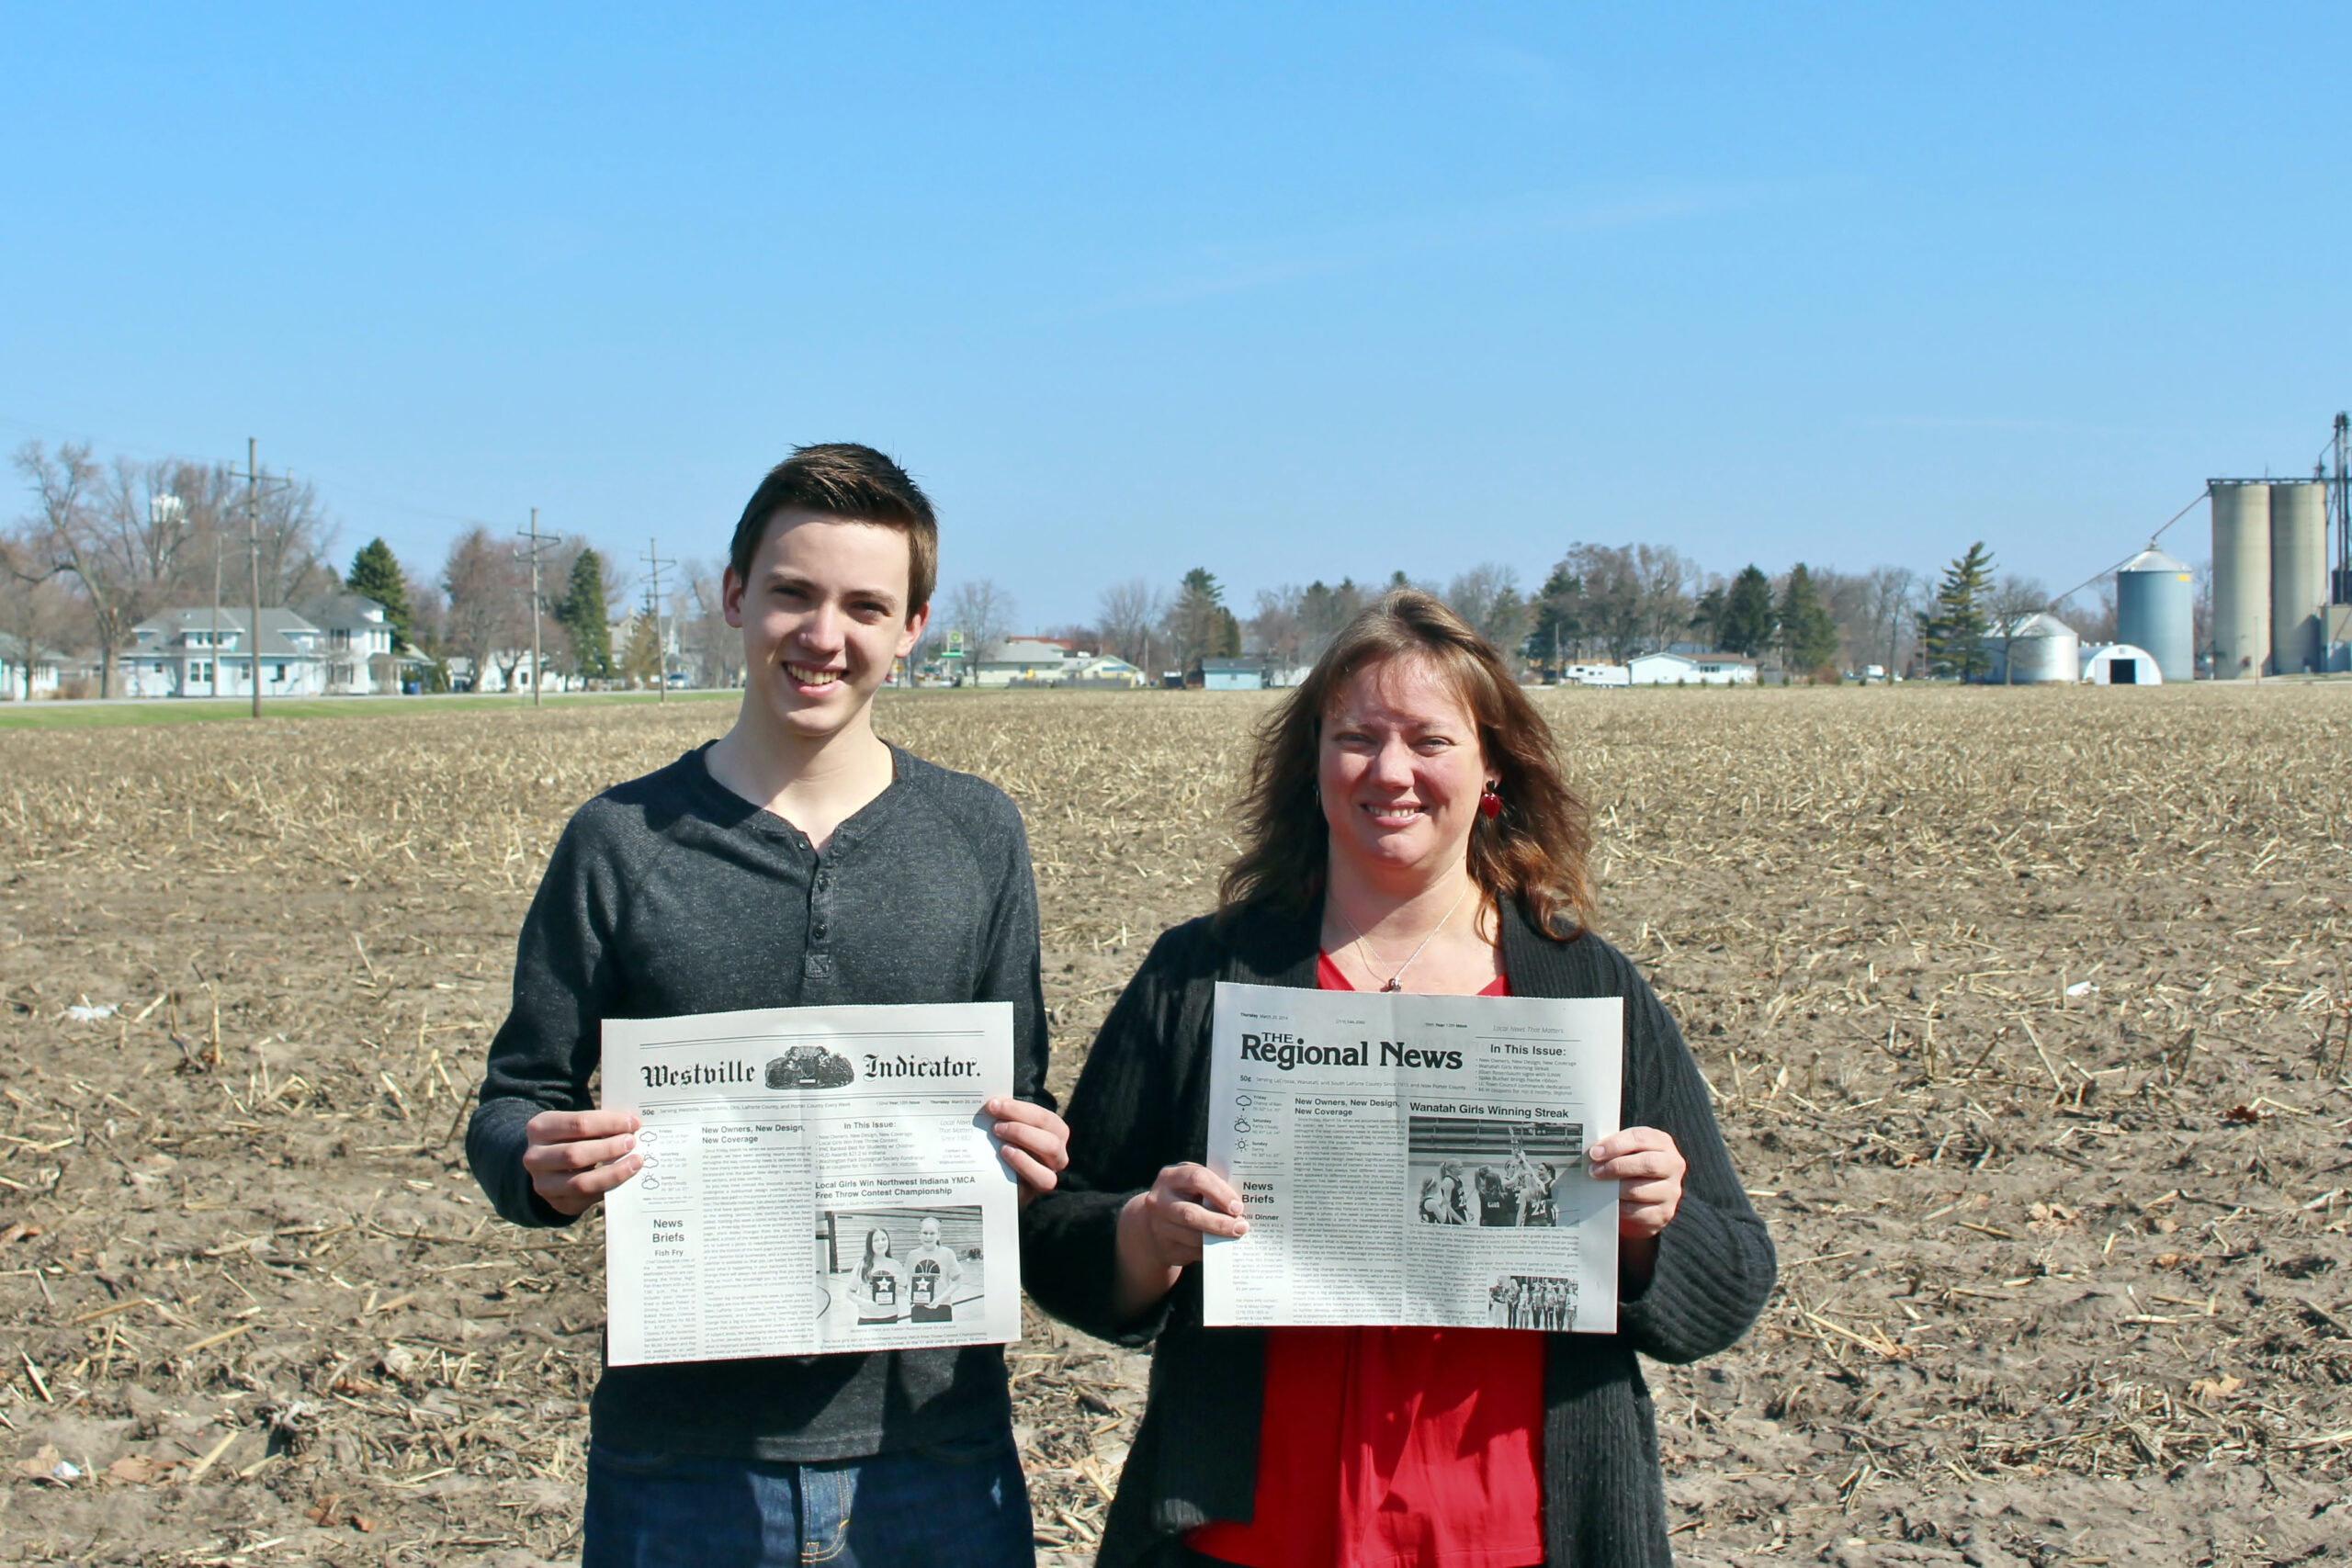 Justin Kiel, left, and his mother, Kelly Kiel, bought The Regional News  (LaCrosse) and the Westville Indicator in northern Indiana. The younger Kiel had been writing and taking photos for the paper before the acquisition.